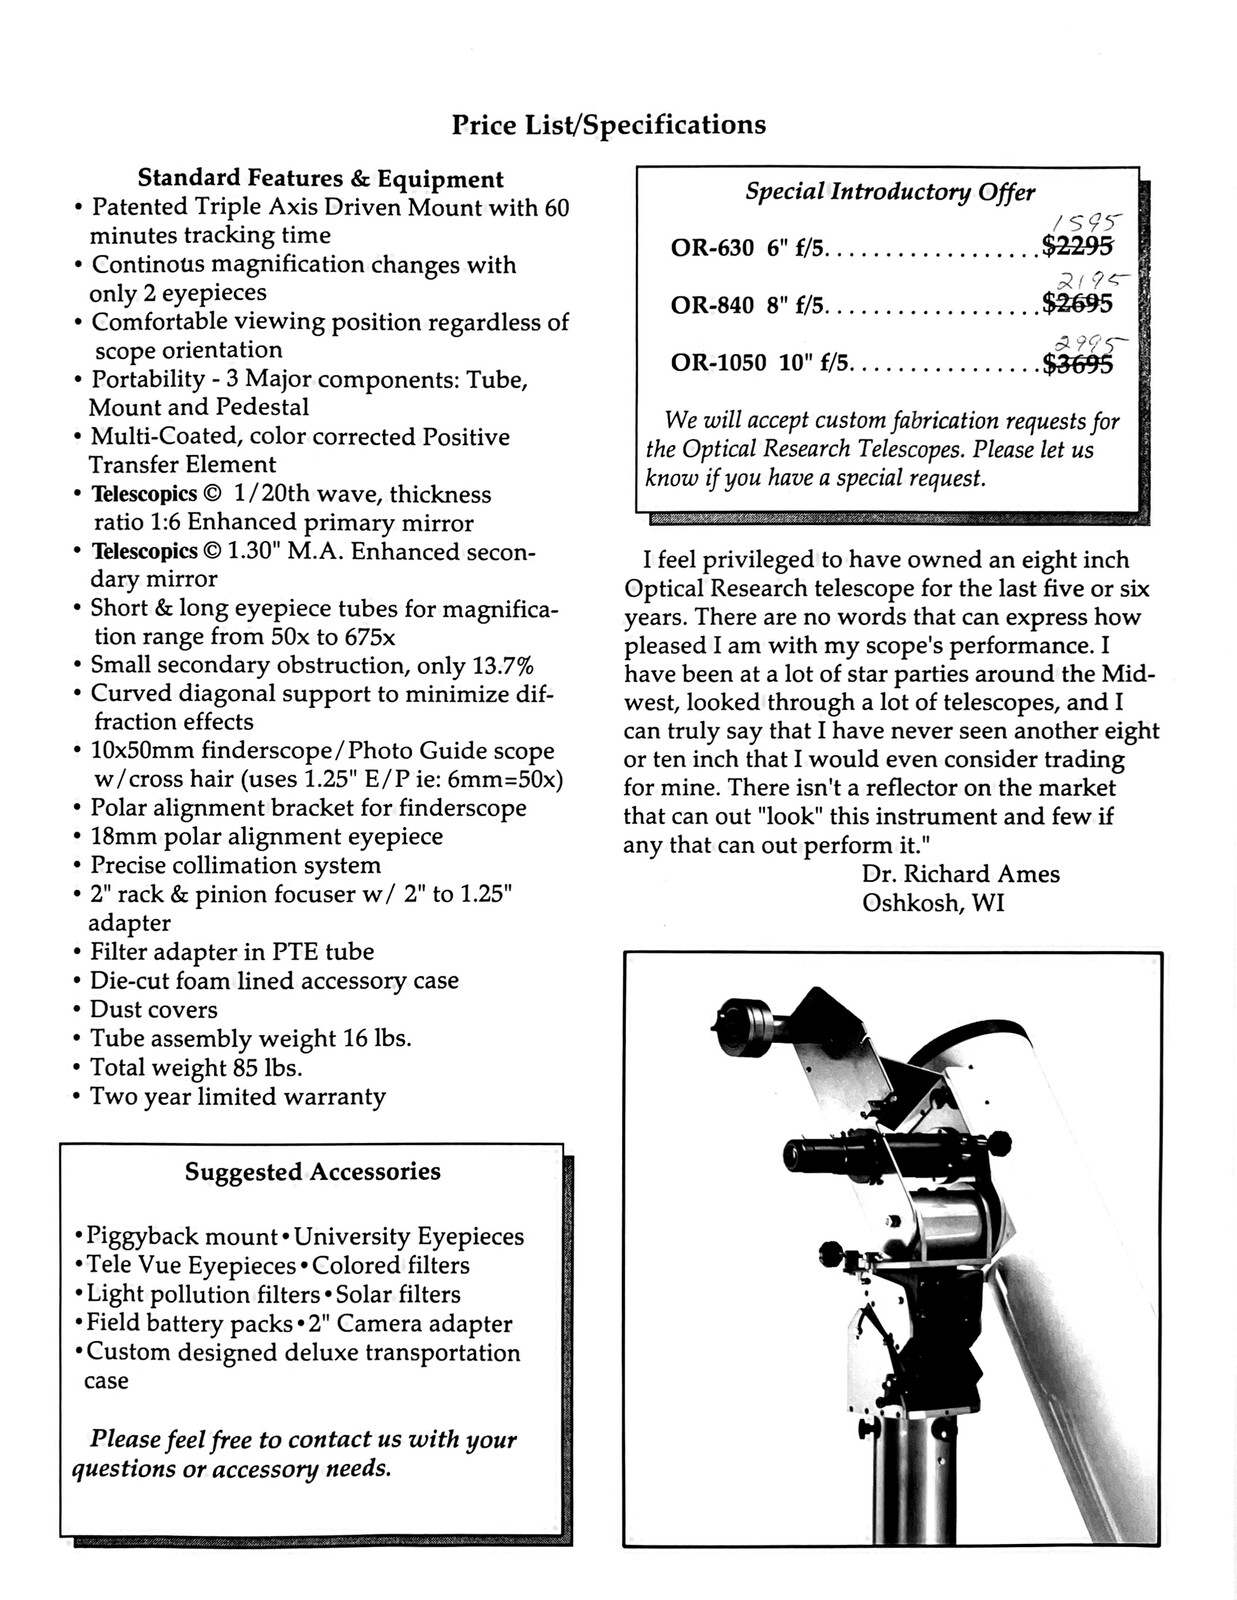 Optical Research Newtonian Telescopes Brochure page 3